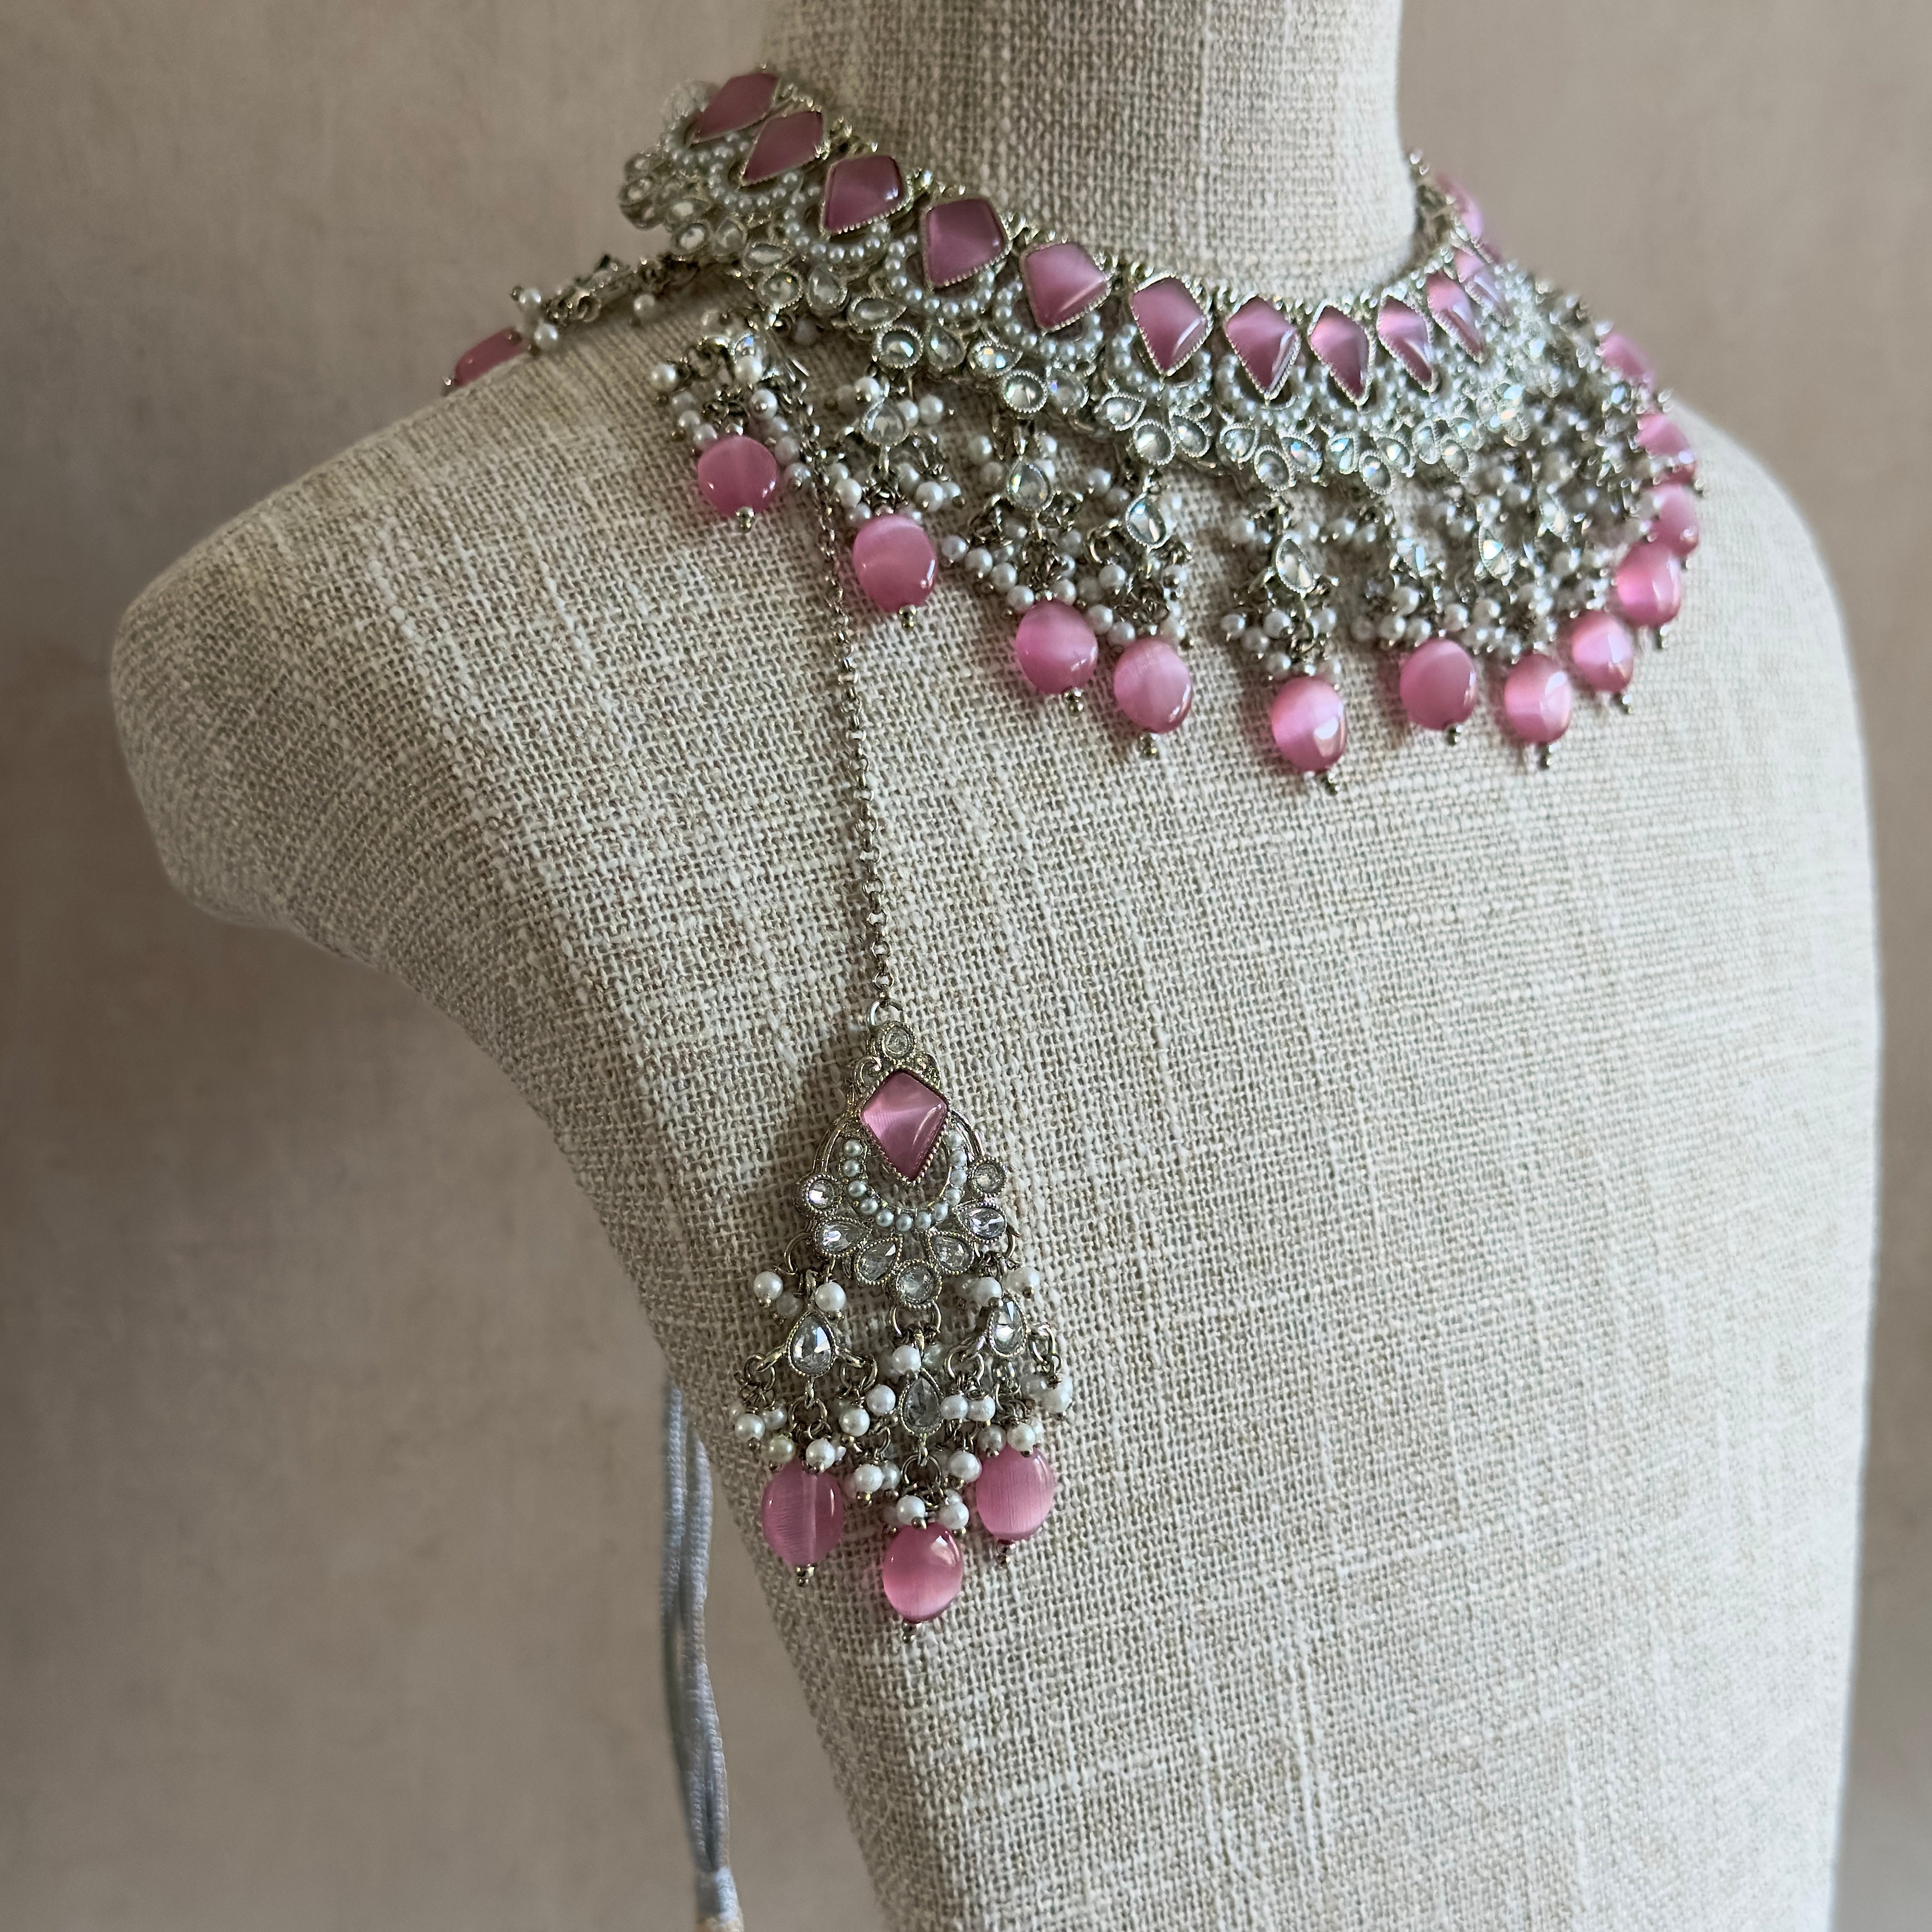 This Tessa Pink Choker Set features luscious pink cat eye stones, a sleek silver polish finish, and an adjustable fabric tie for a comfortable fit. Perfect for any formal occasion, this set also comes with matching earrings and tikka for a complete and elegant look. Elevate your style with this stunning set.